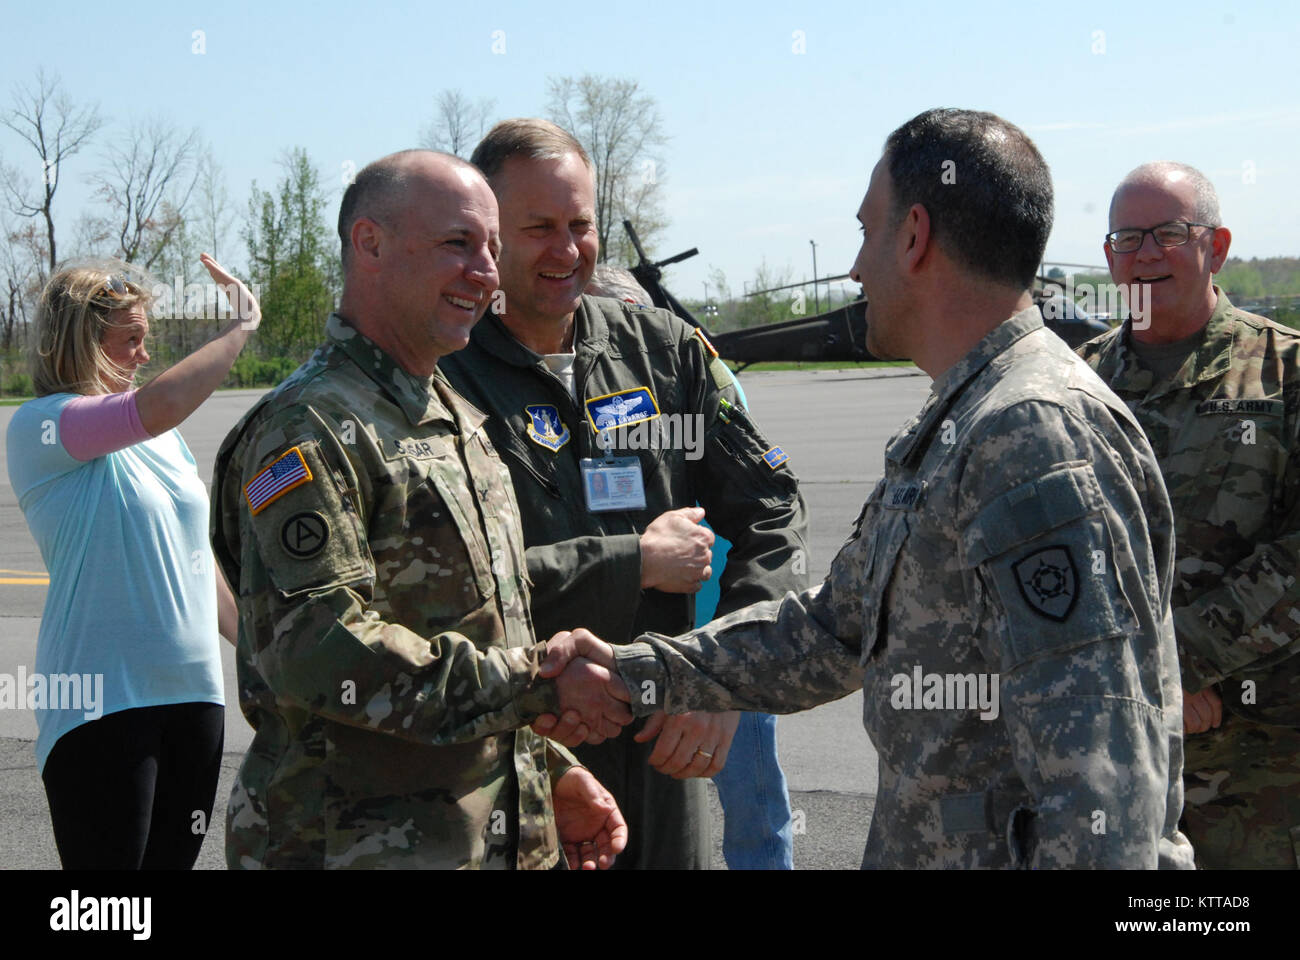 U.S. Army Col. Mark Slusar, the New York National Guard State Aviation Officer, congratulates Chief Warrant Officer 5 Tom Dinoto on completing his final flight as an Army Aviator serving with the New York Army National Guard May 1, 2017 in Latham, N.Y. Dinoto, from Ballston Lake, N.Y., completes a military career in Army Aviation spanning 22 years of both active and National Guard service, including multiple overseas deployments. Dinoto's final flight was in the C-12 Huron passenger and transport aircraft. U.S. National Guard photo by Col. Richard Goldenberg. Stock Photo